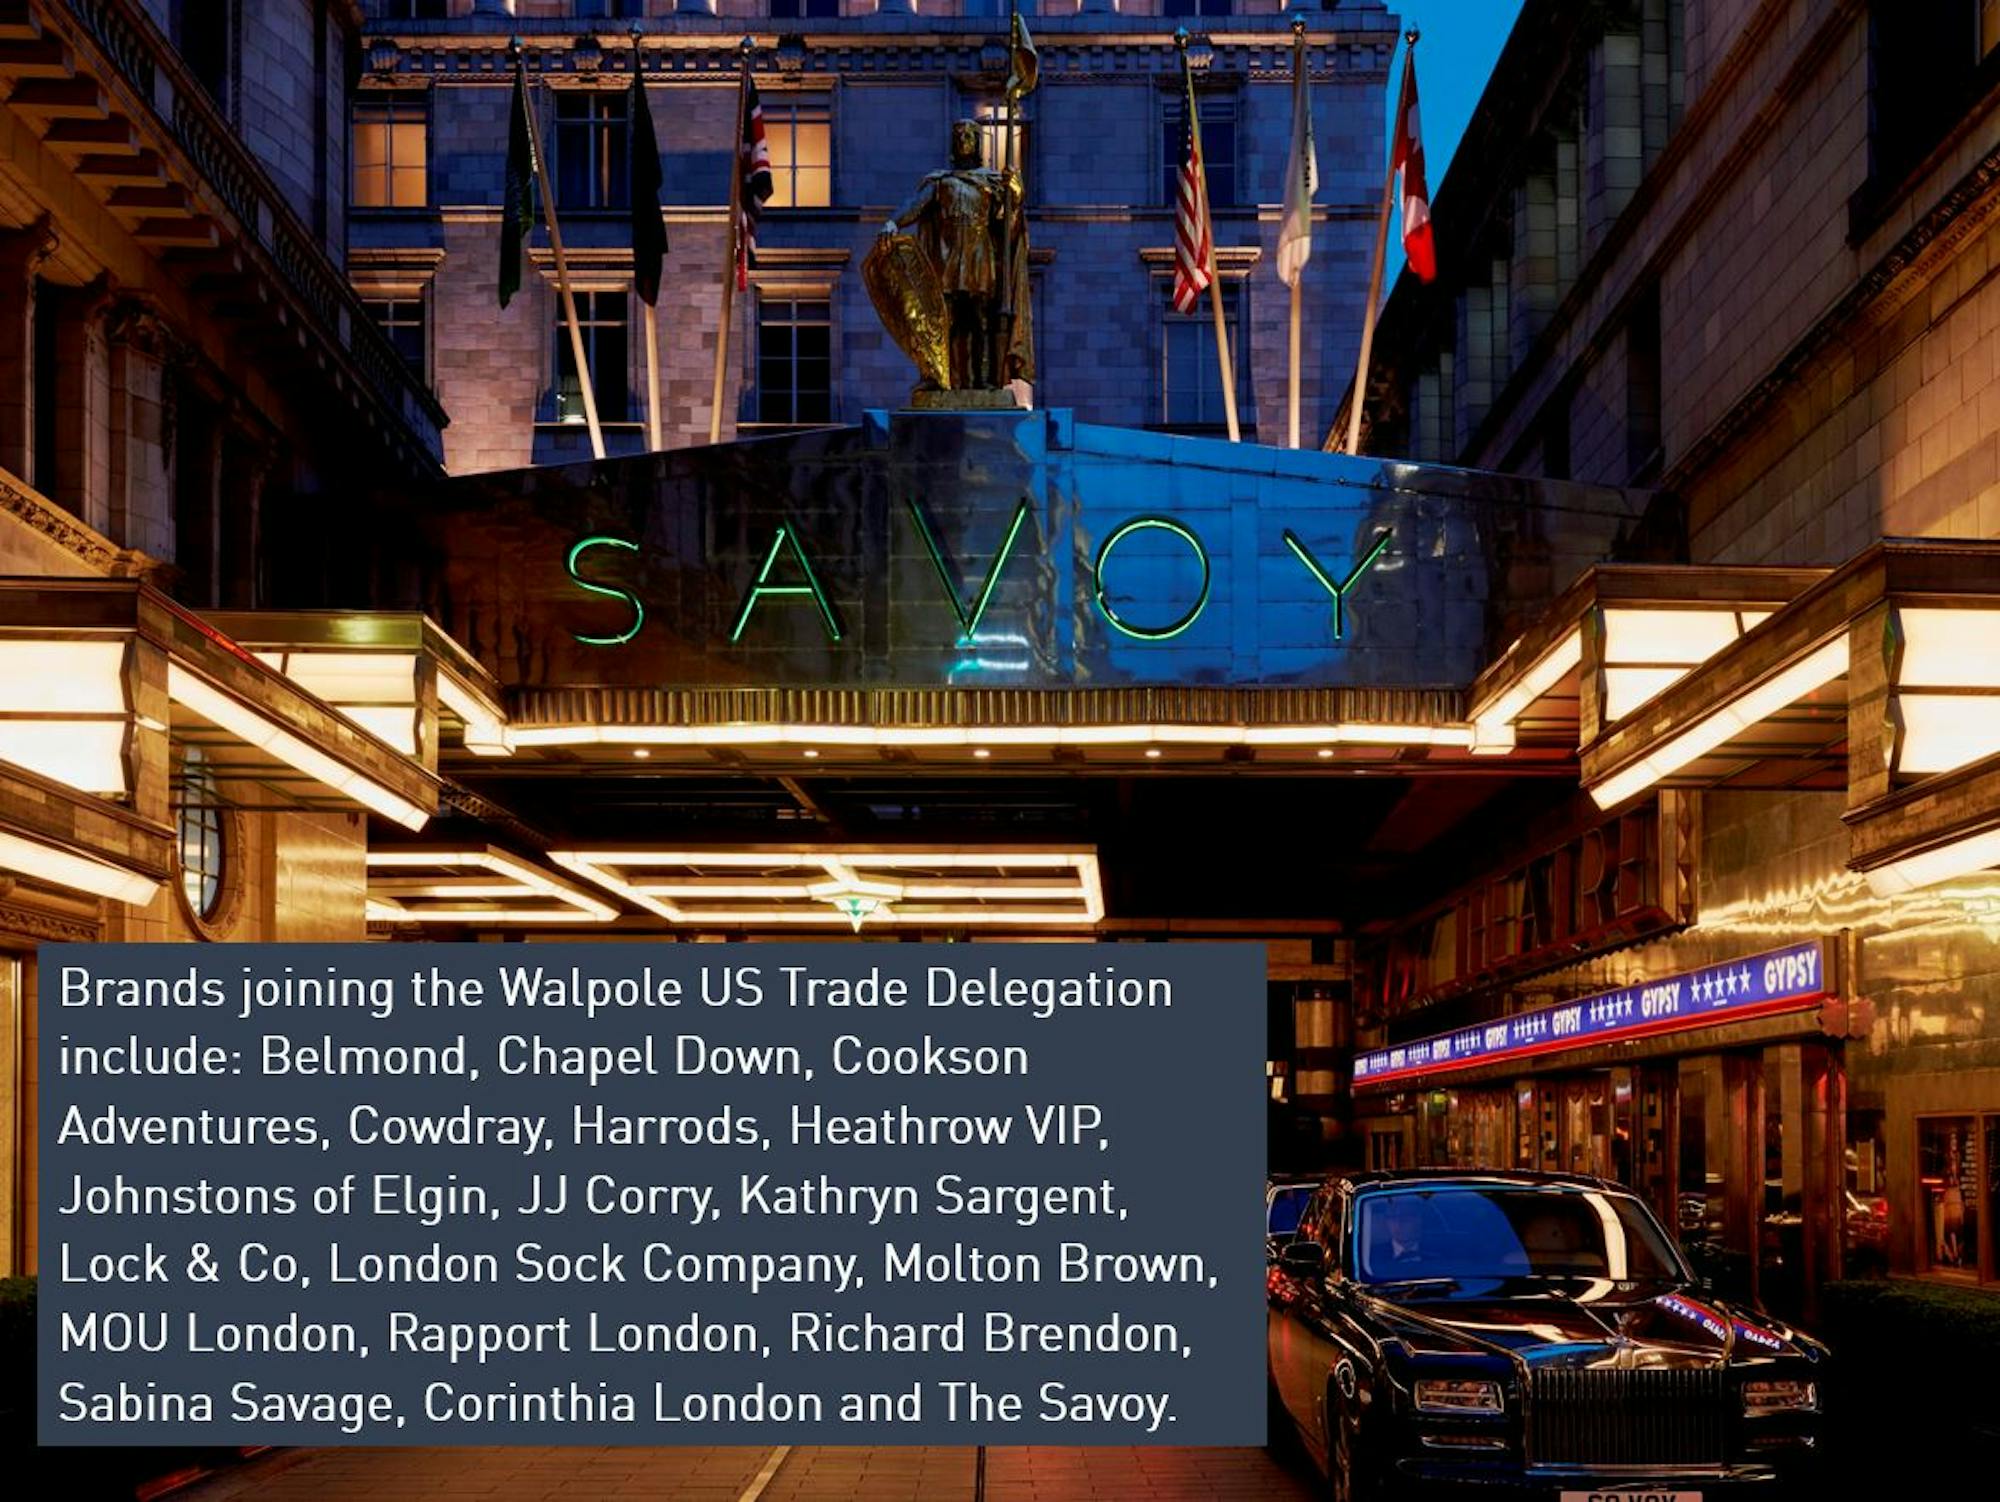 Why New York? Walpole's US Trade Delegation and British Luxury Showrooms  